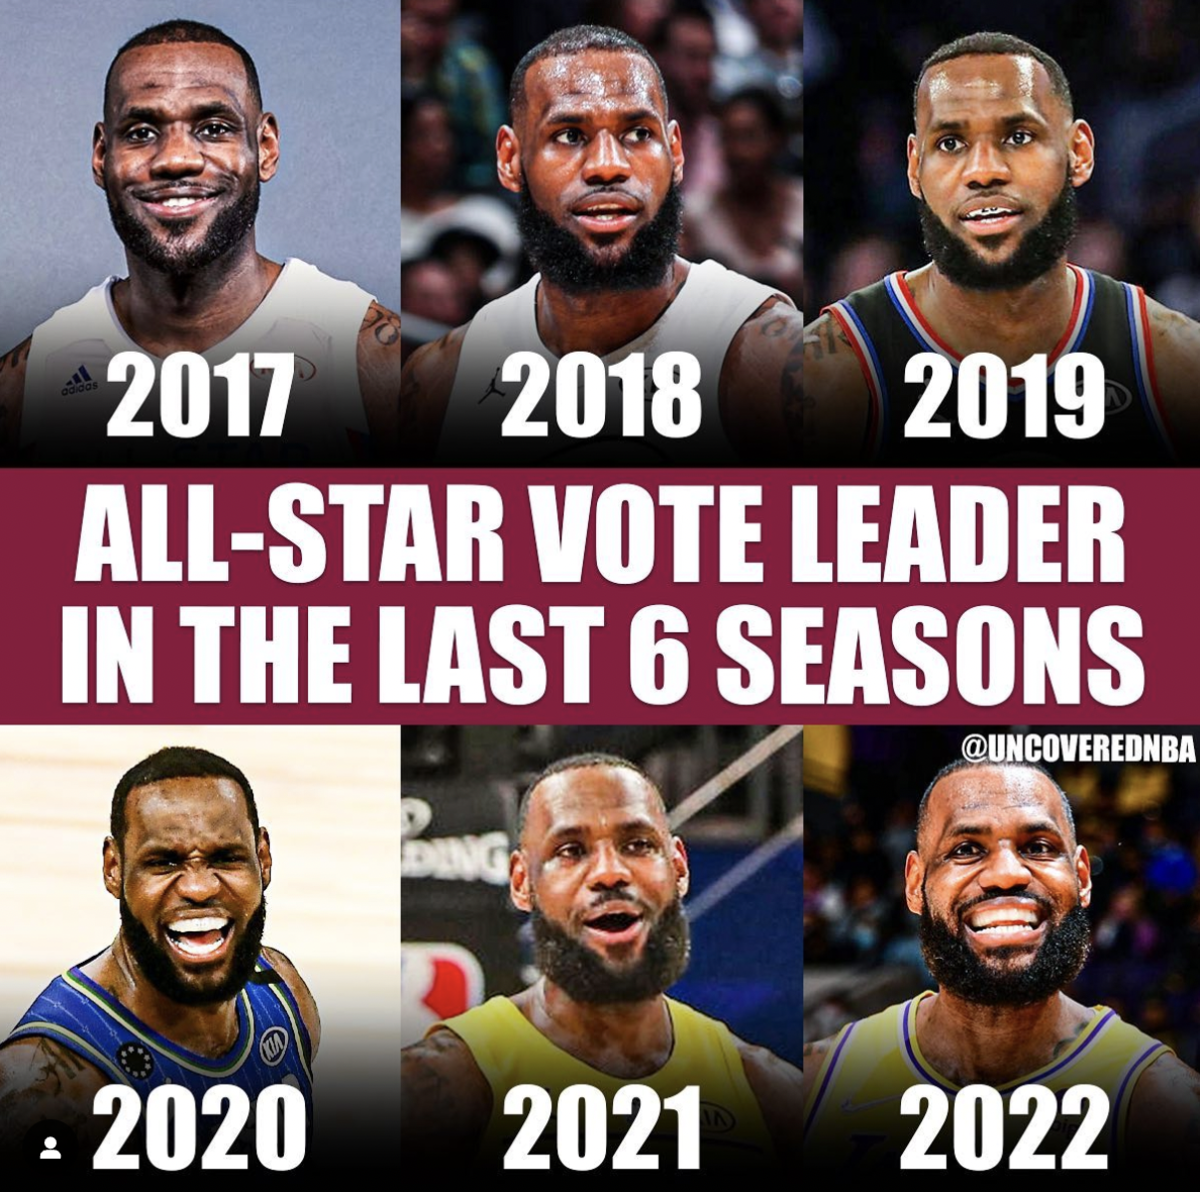 LeBron James Has The Most All-Star Votes In The Last 6 Seasons